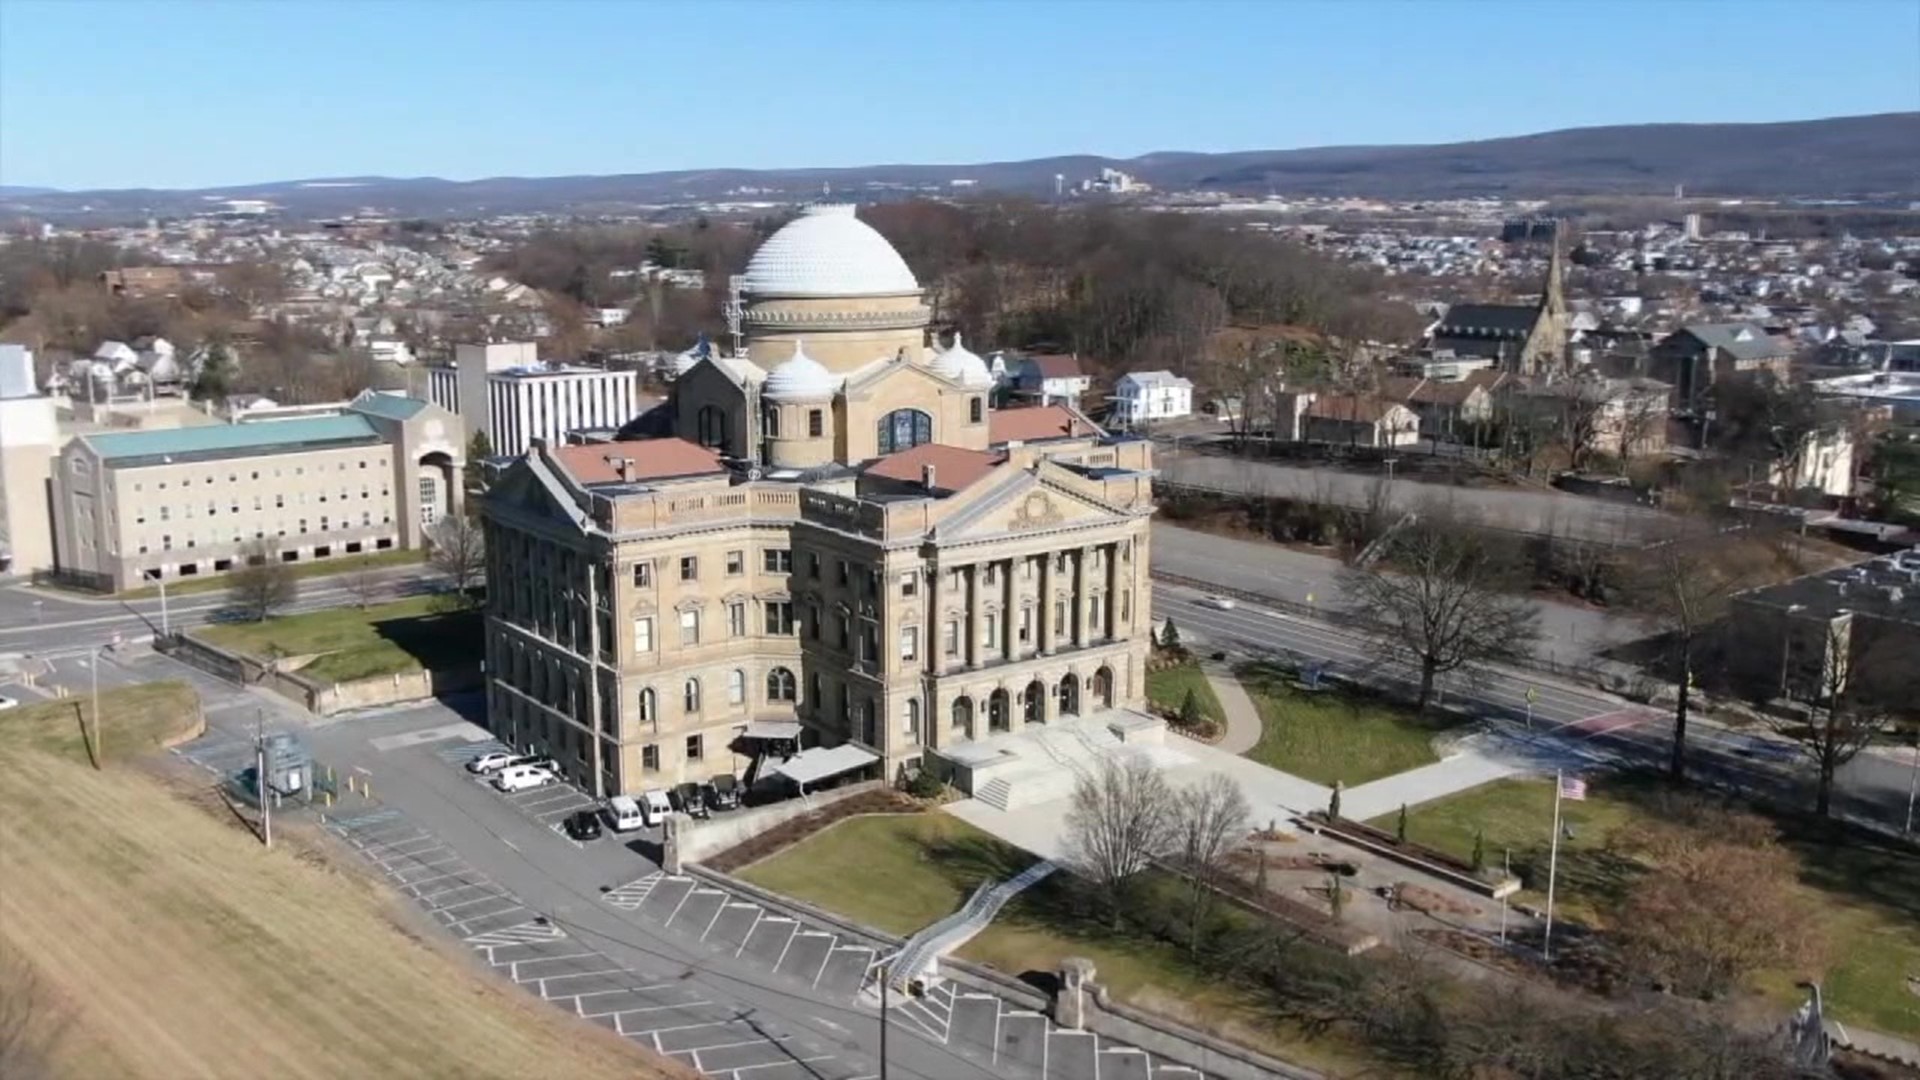 A 2023 budget proposal was presented to the county council last night in Wilkes-Barre.